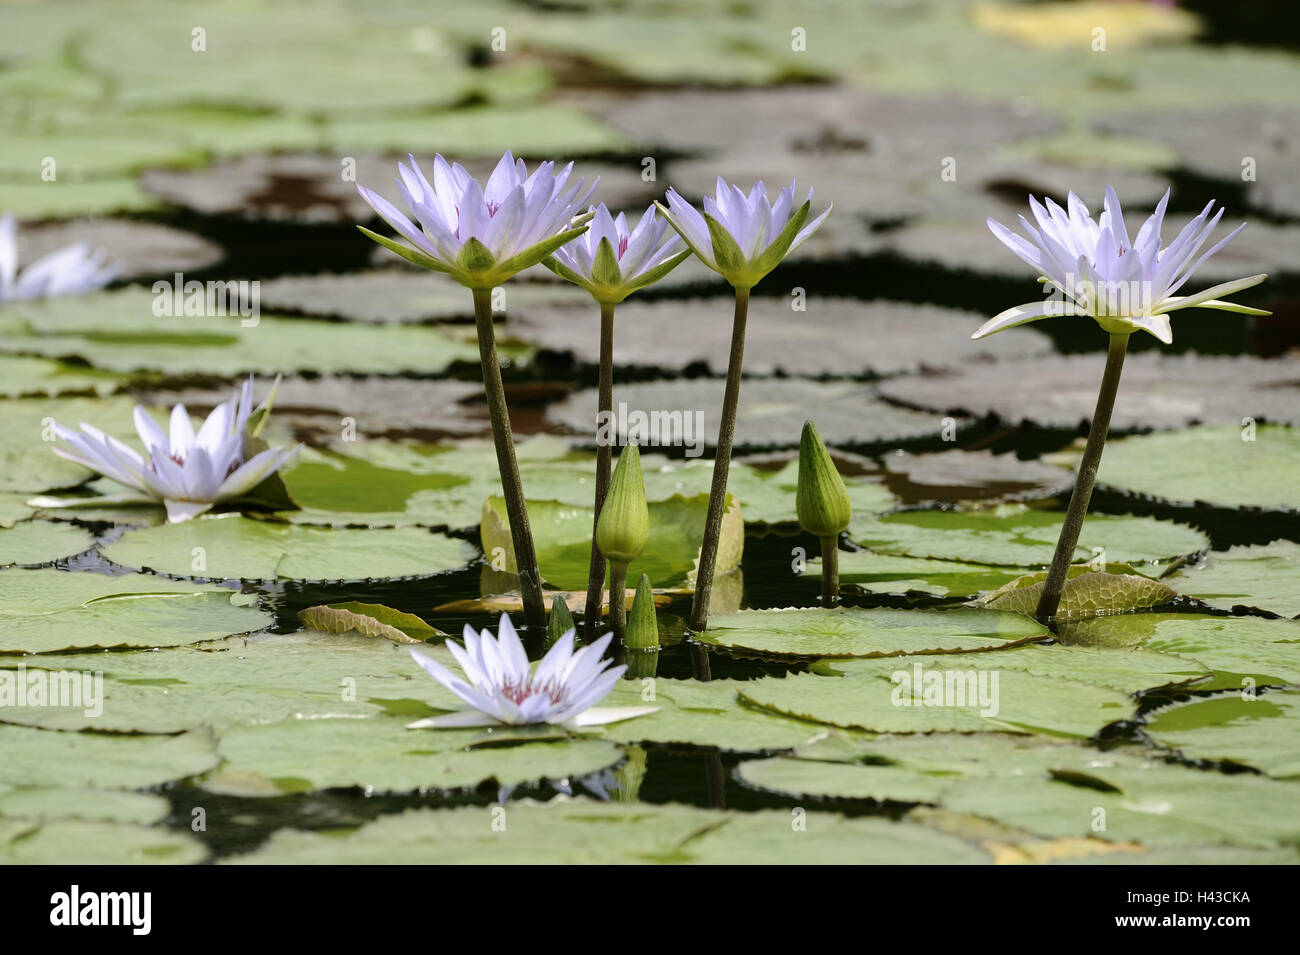 Pond, water lilies, blossoms, white, plant, water plants, water lily pond, lake, blossoms, water lily blossoms, swimming leaves, nature, botany, period bloom, Stock Photo